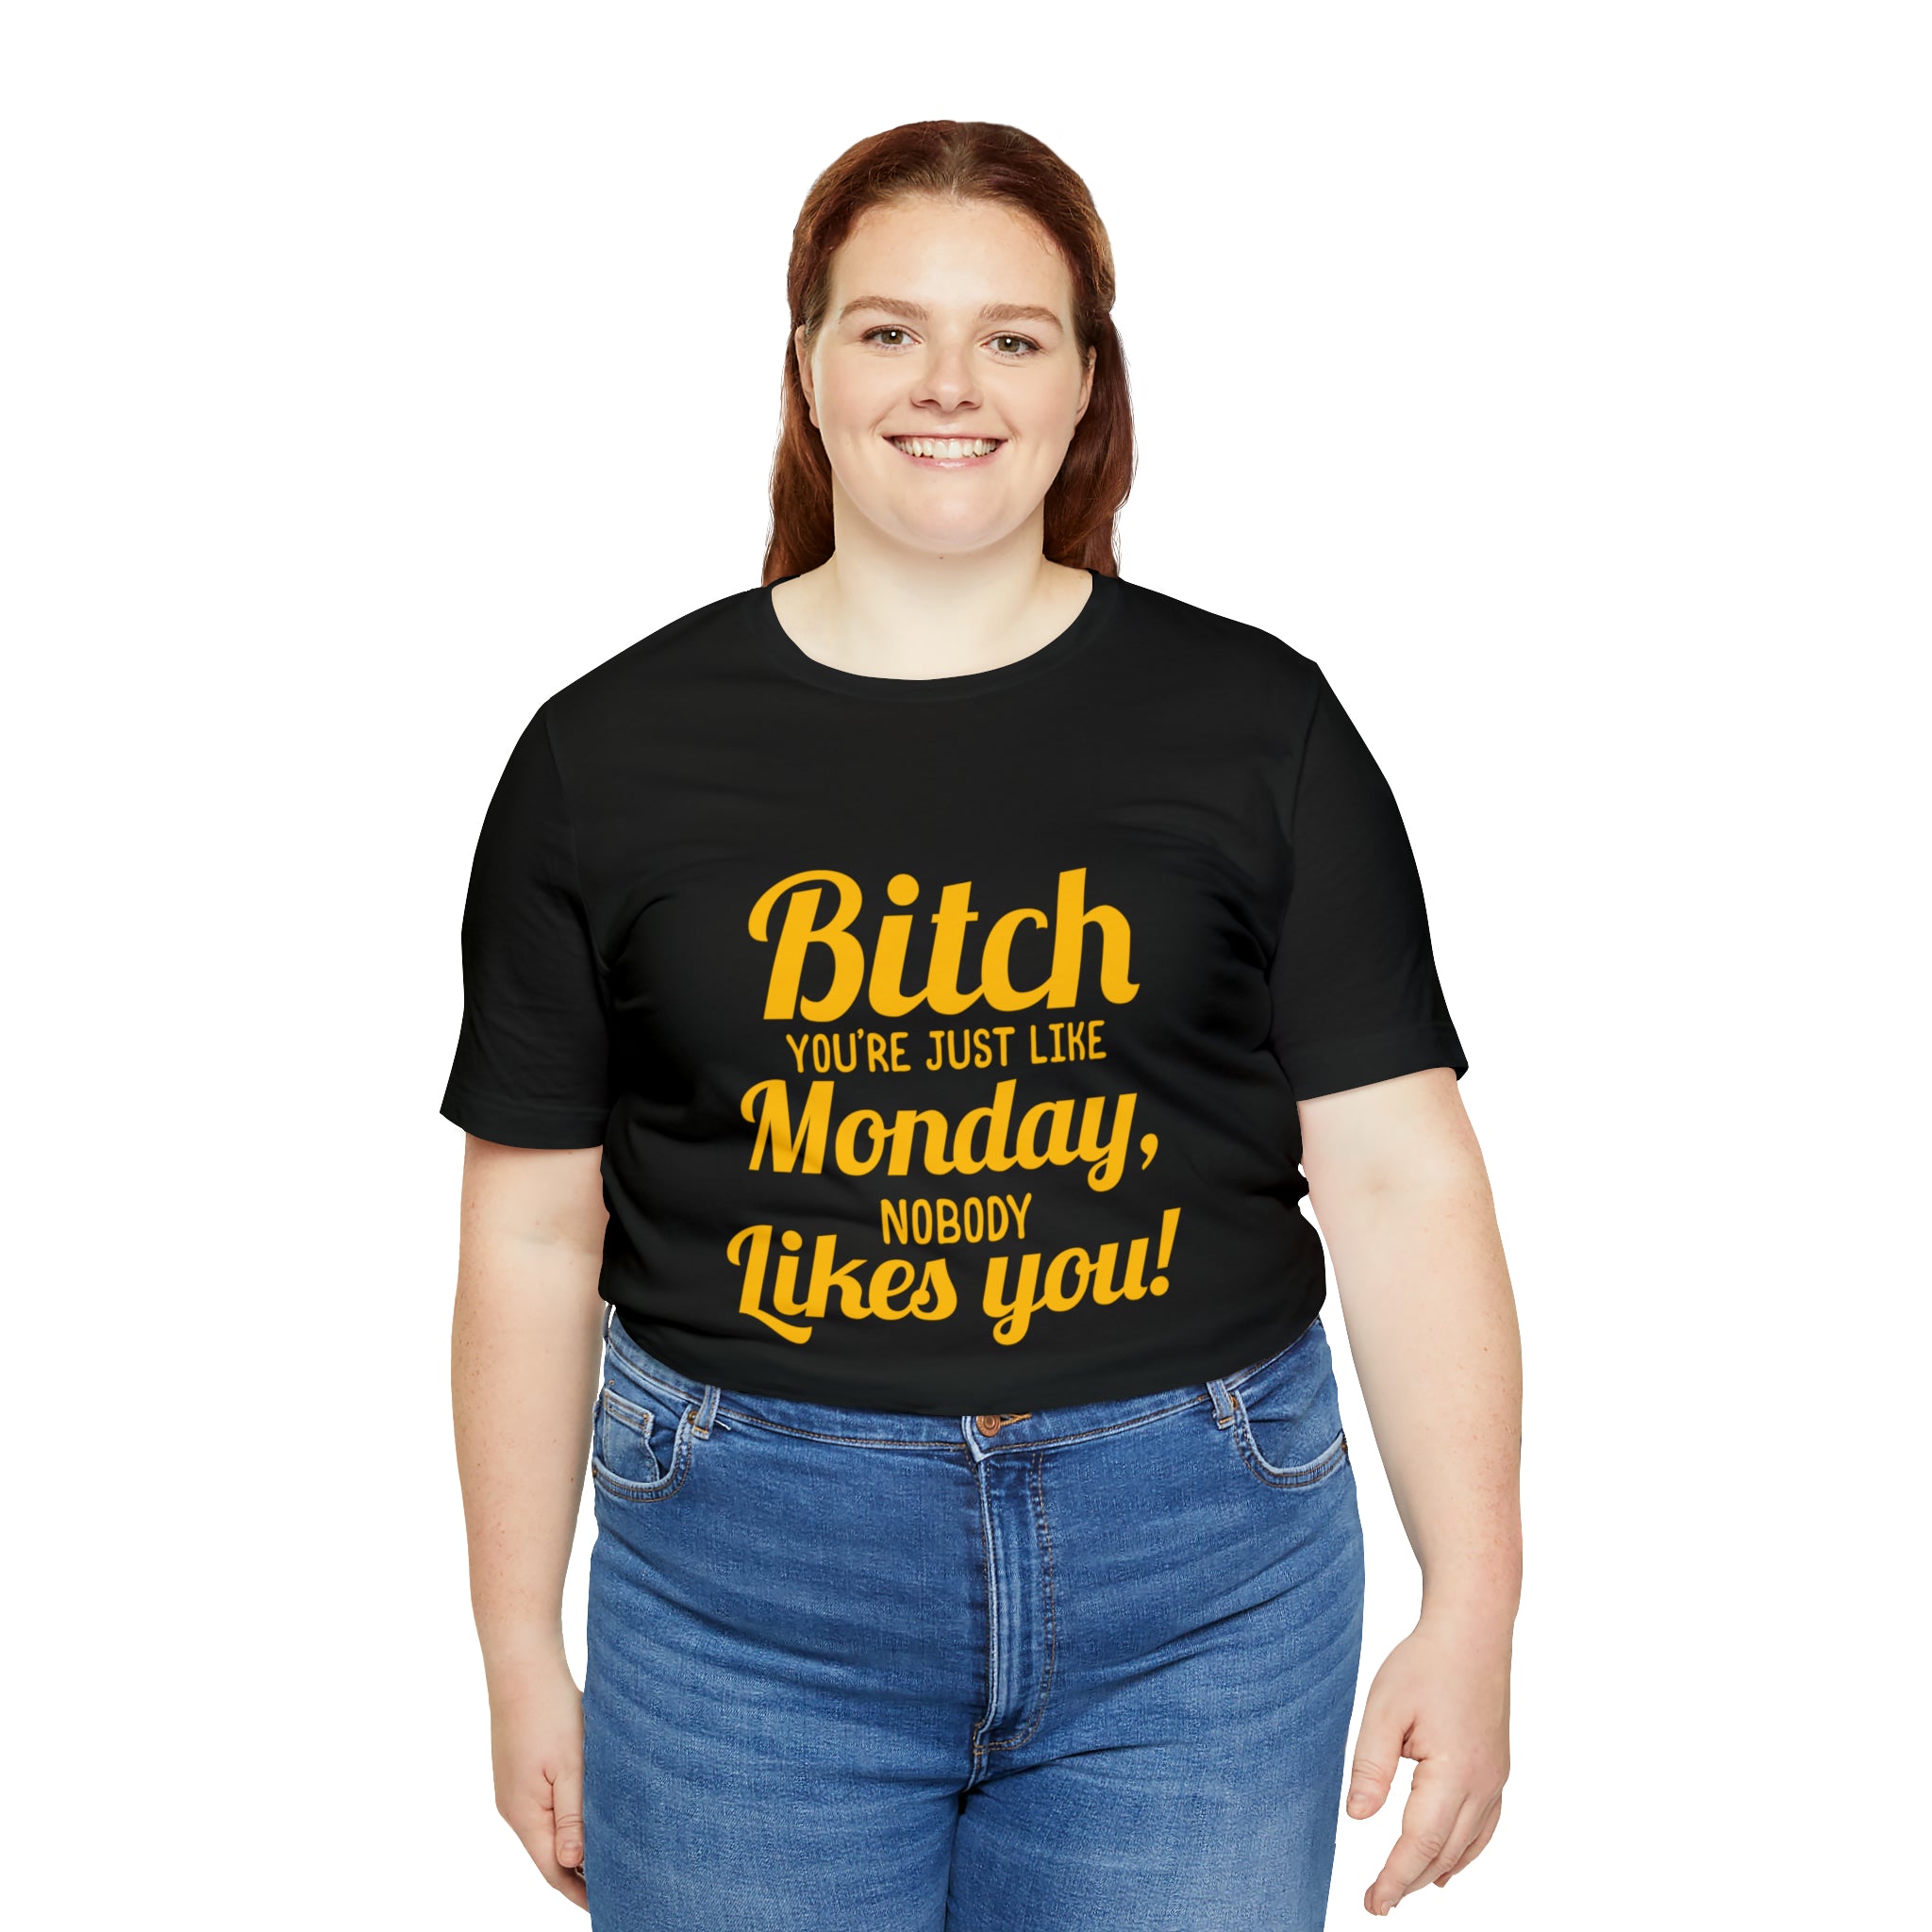 A woman wearing a stylish Bitch you are just like Monday nobody likes you T-Shirt likes you.